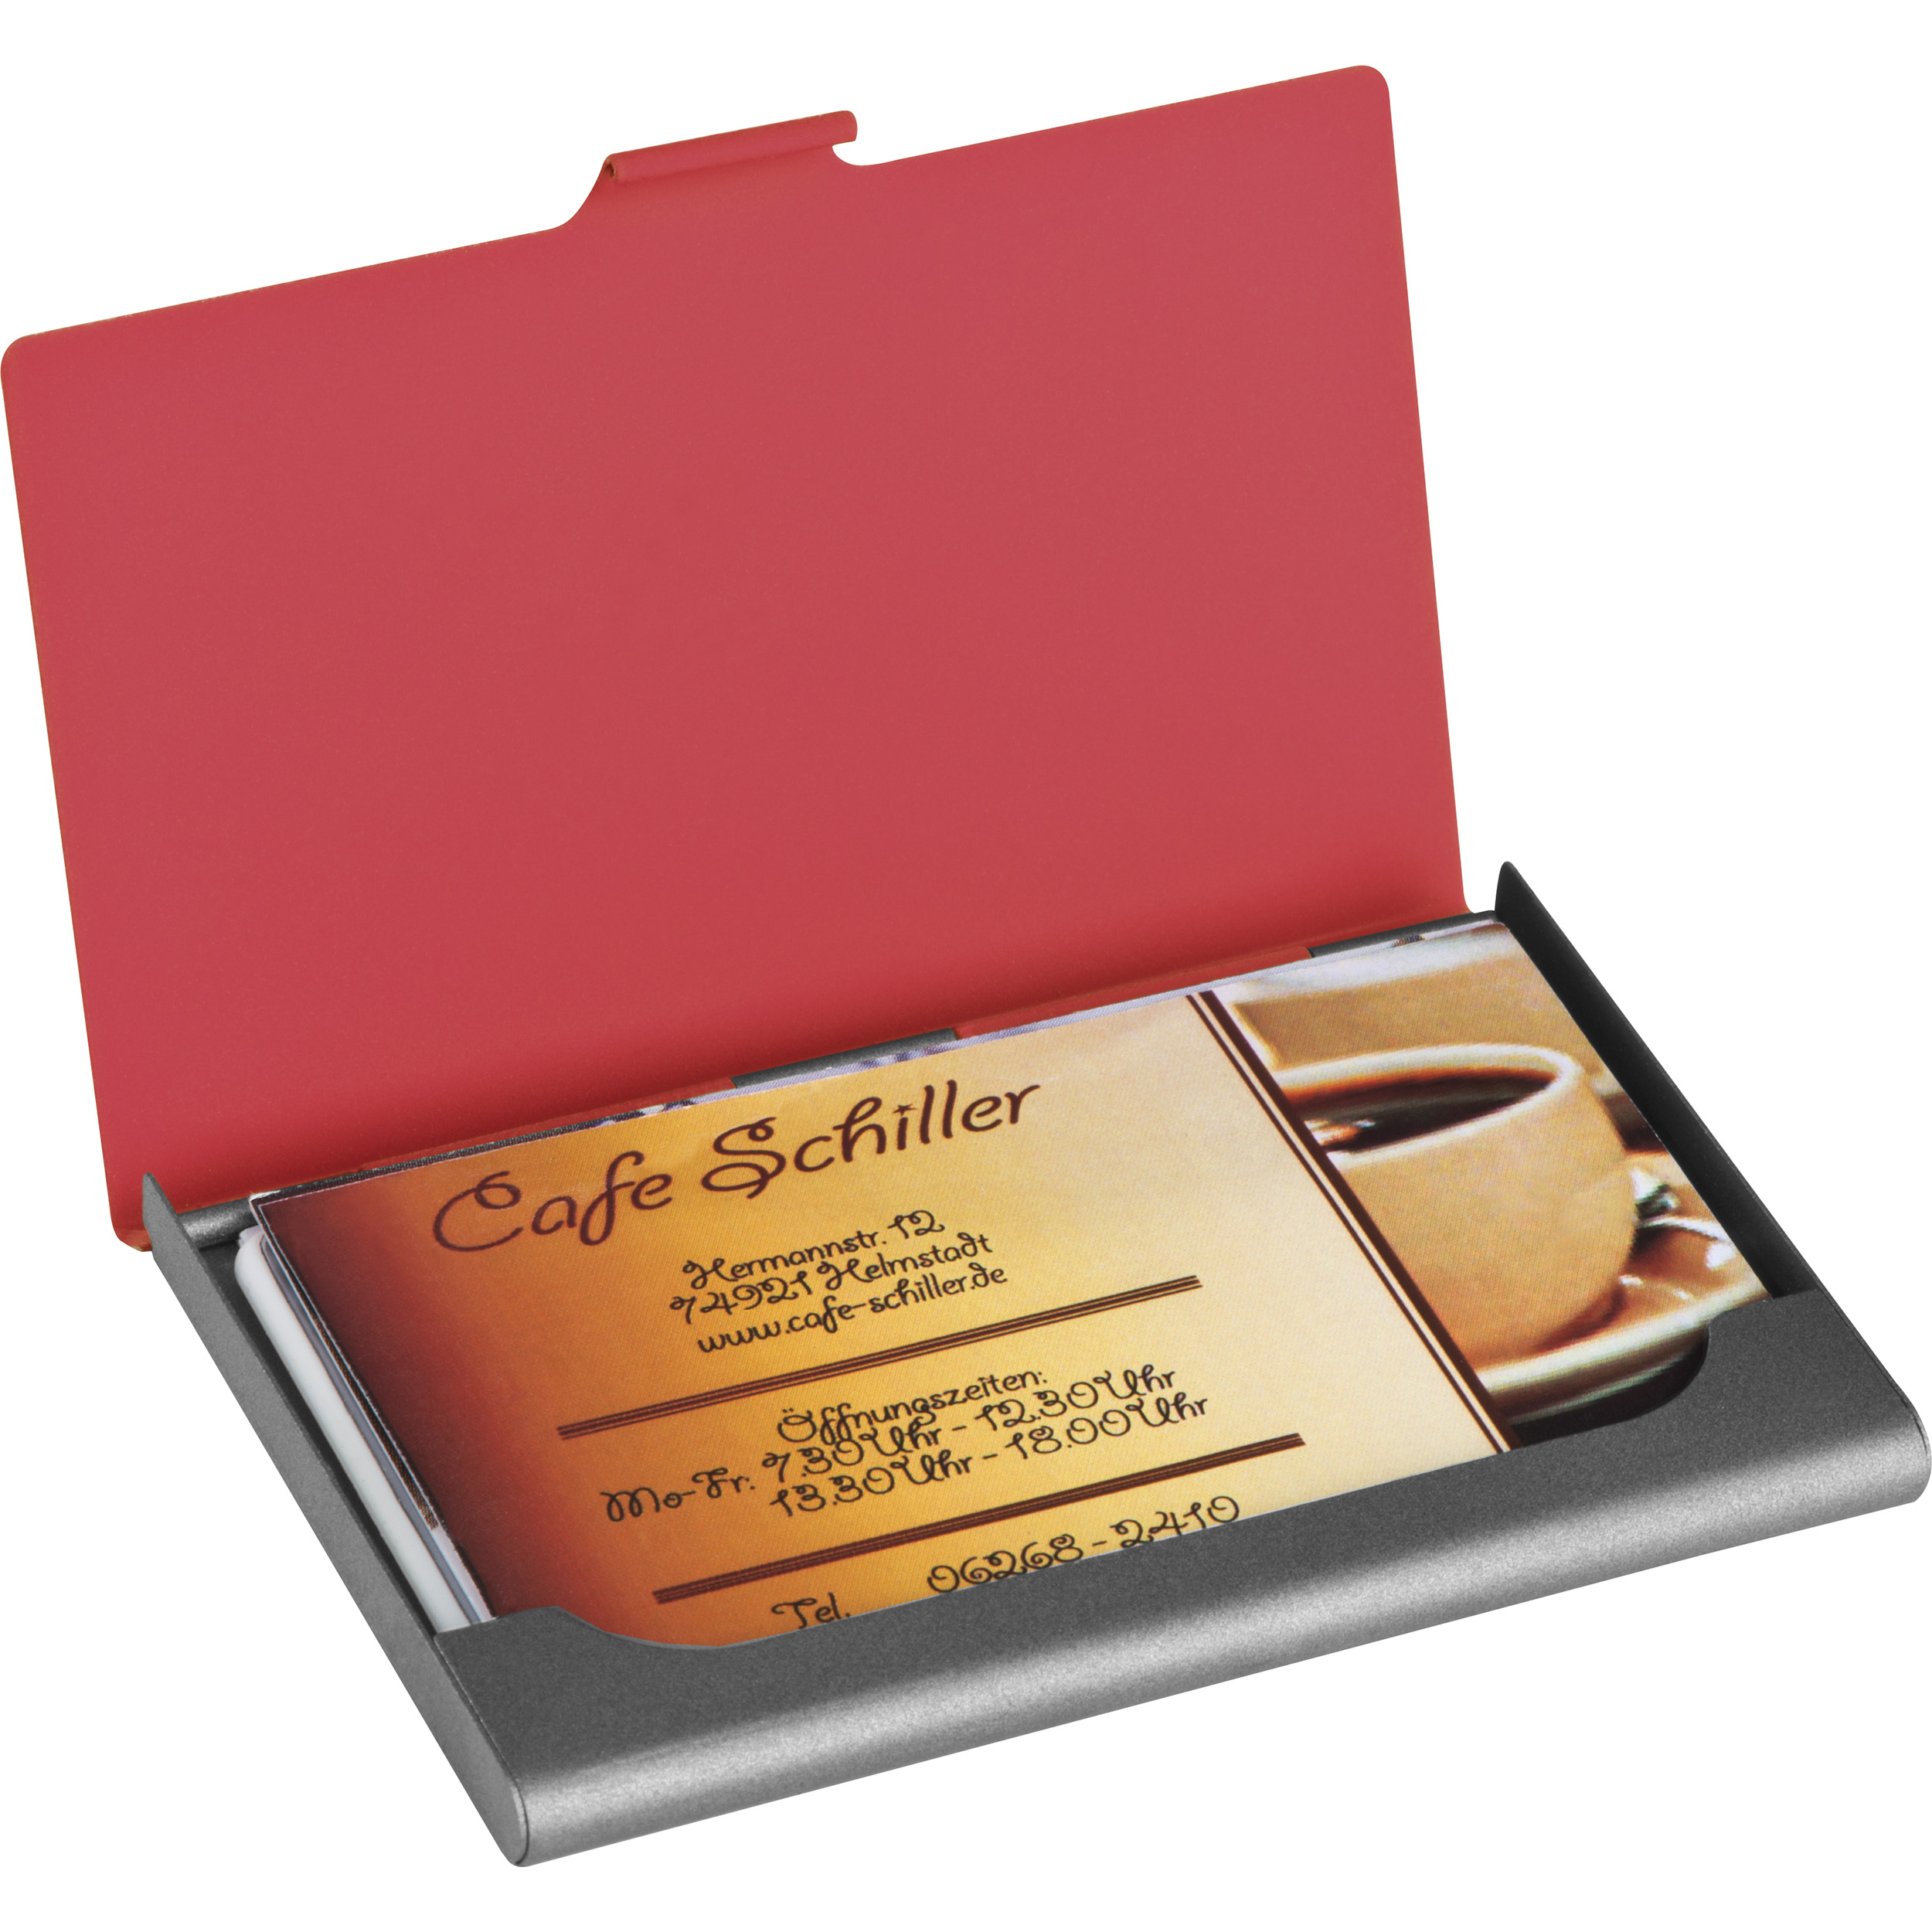 Rubberized business card holder